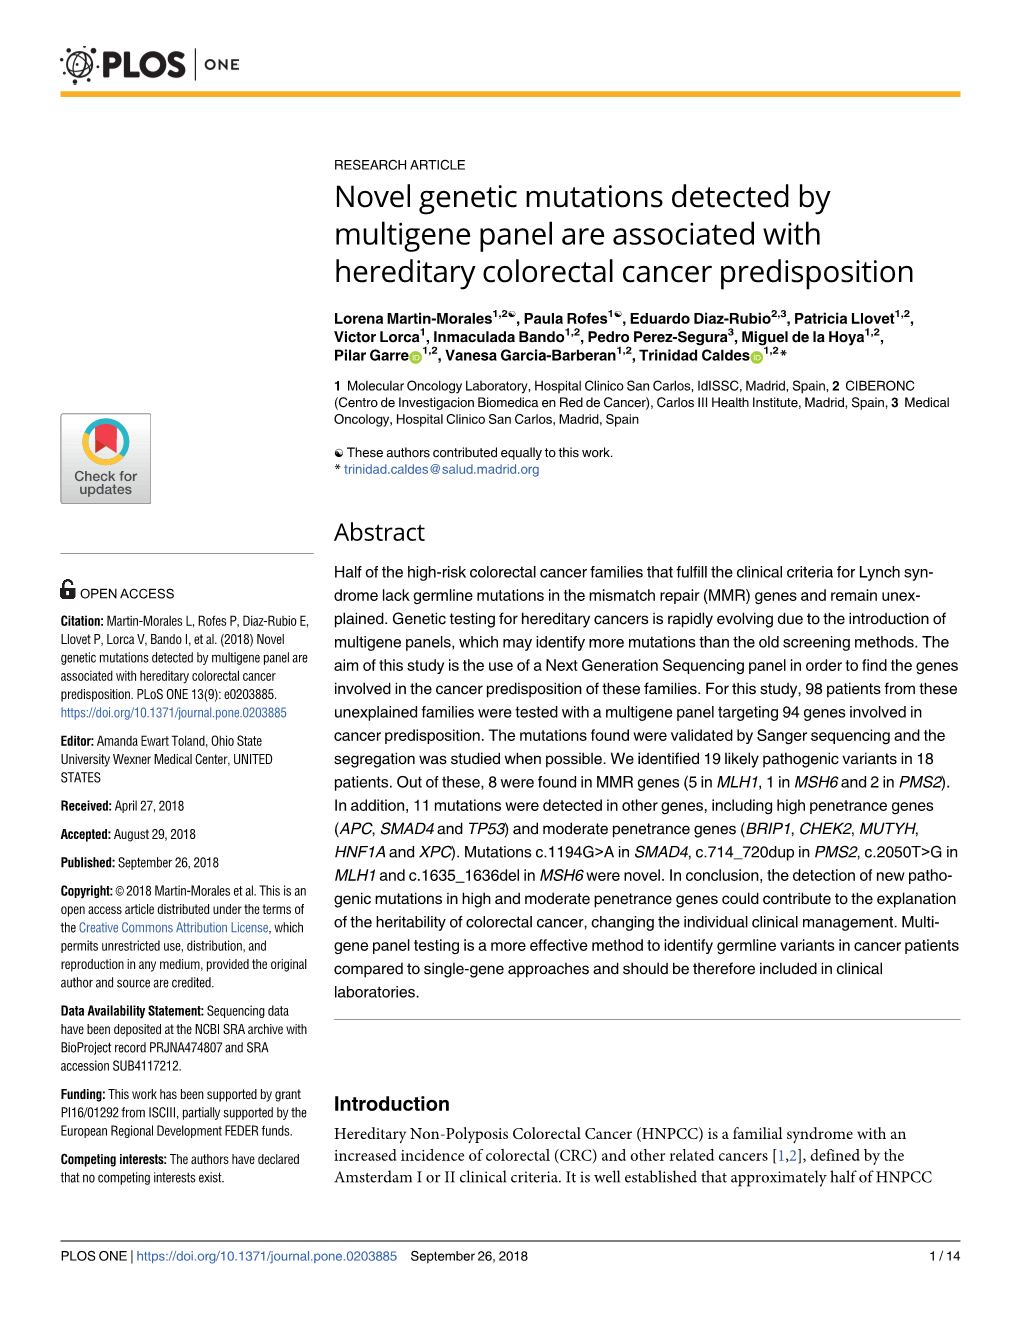 Novel Genetic Mutations Detected by Multigene Panel Are Associated with Hereditary Colorectal Cancer Predisposition